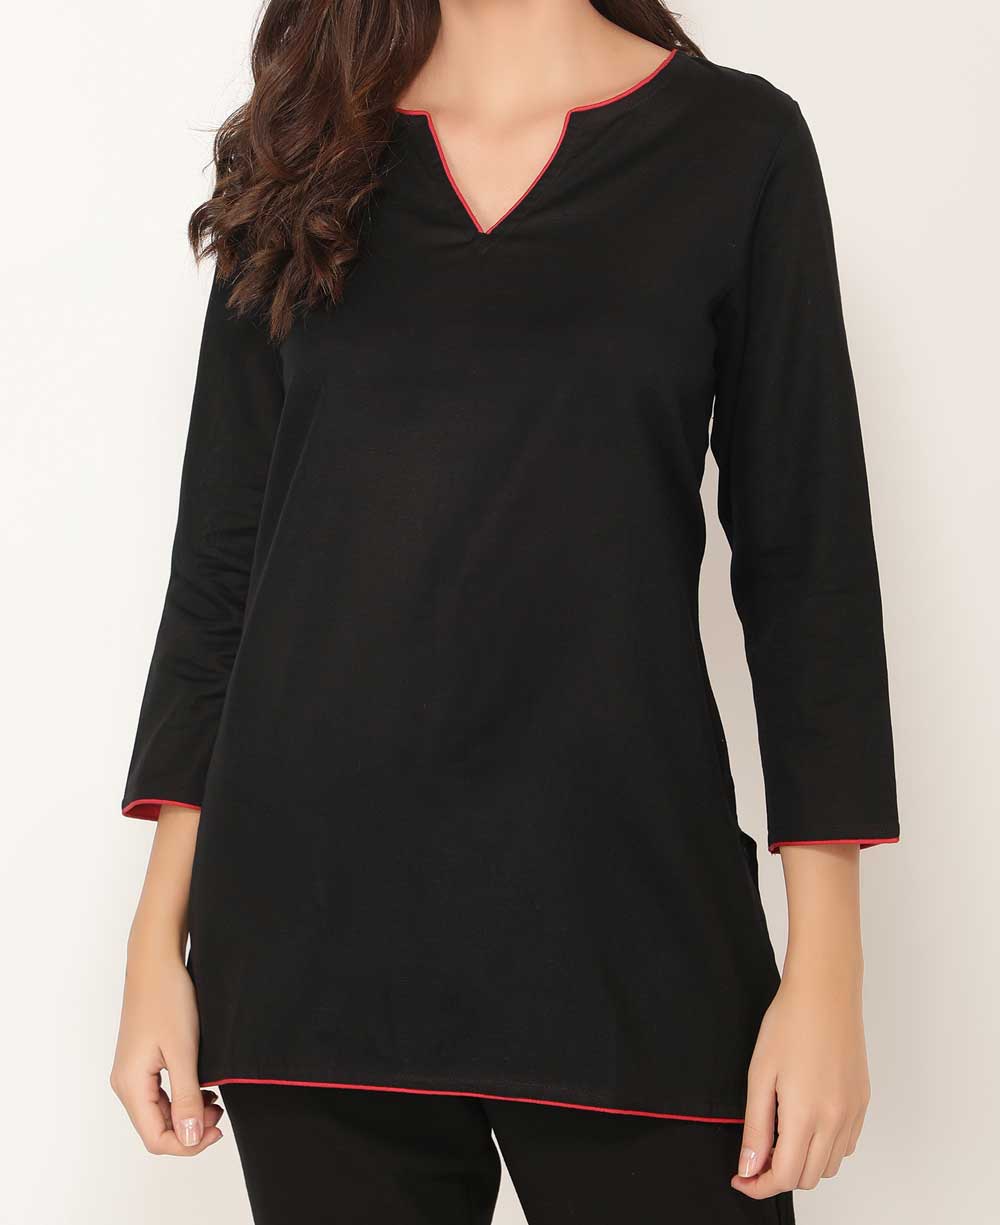 Black And Red Woven Cotton Tunic Top - Shirts & Tops S